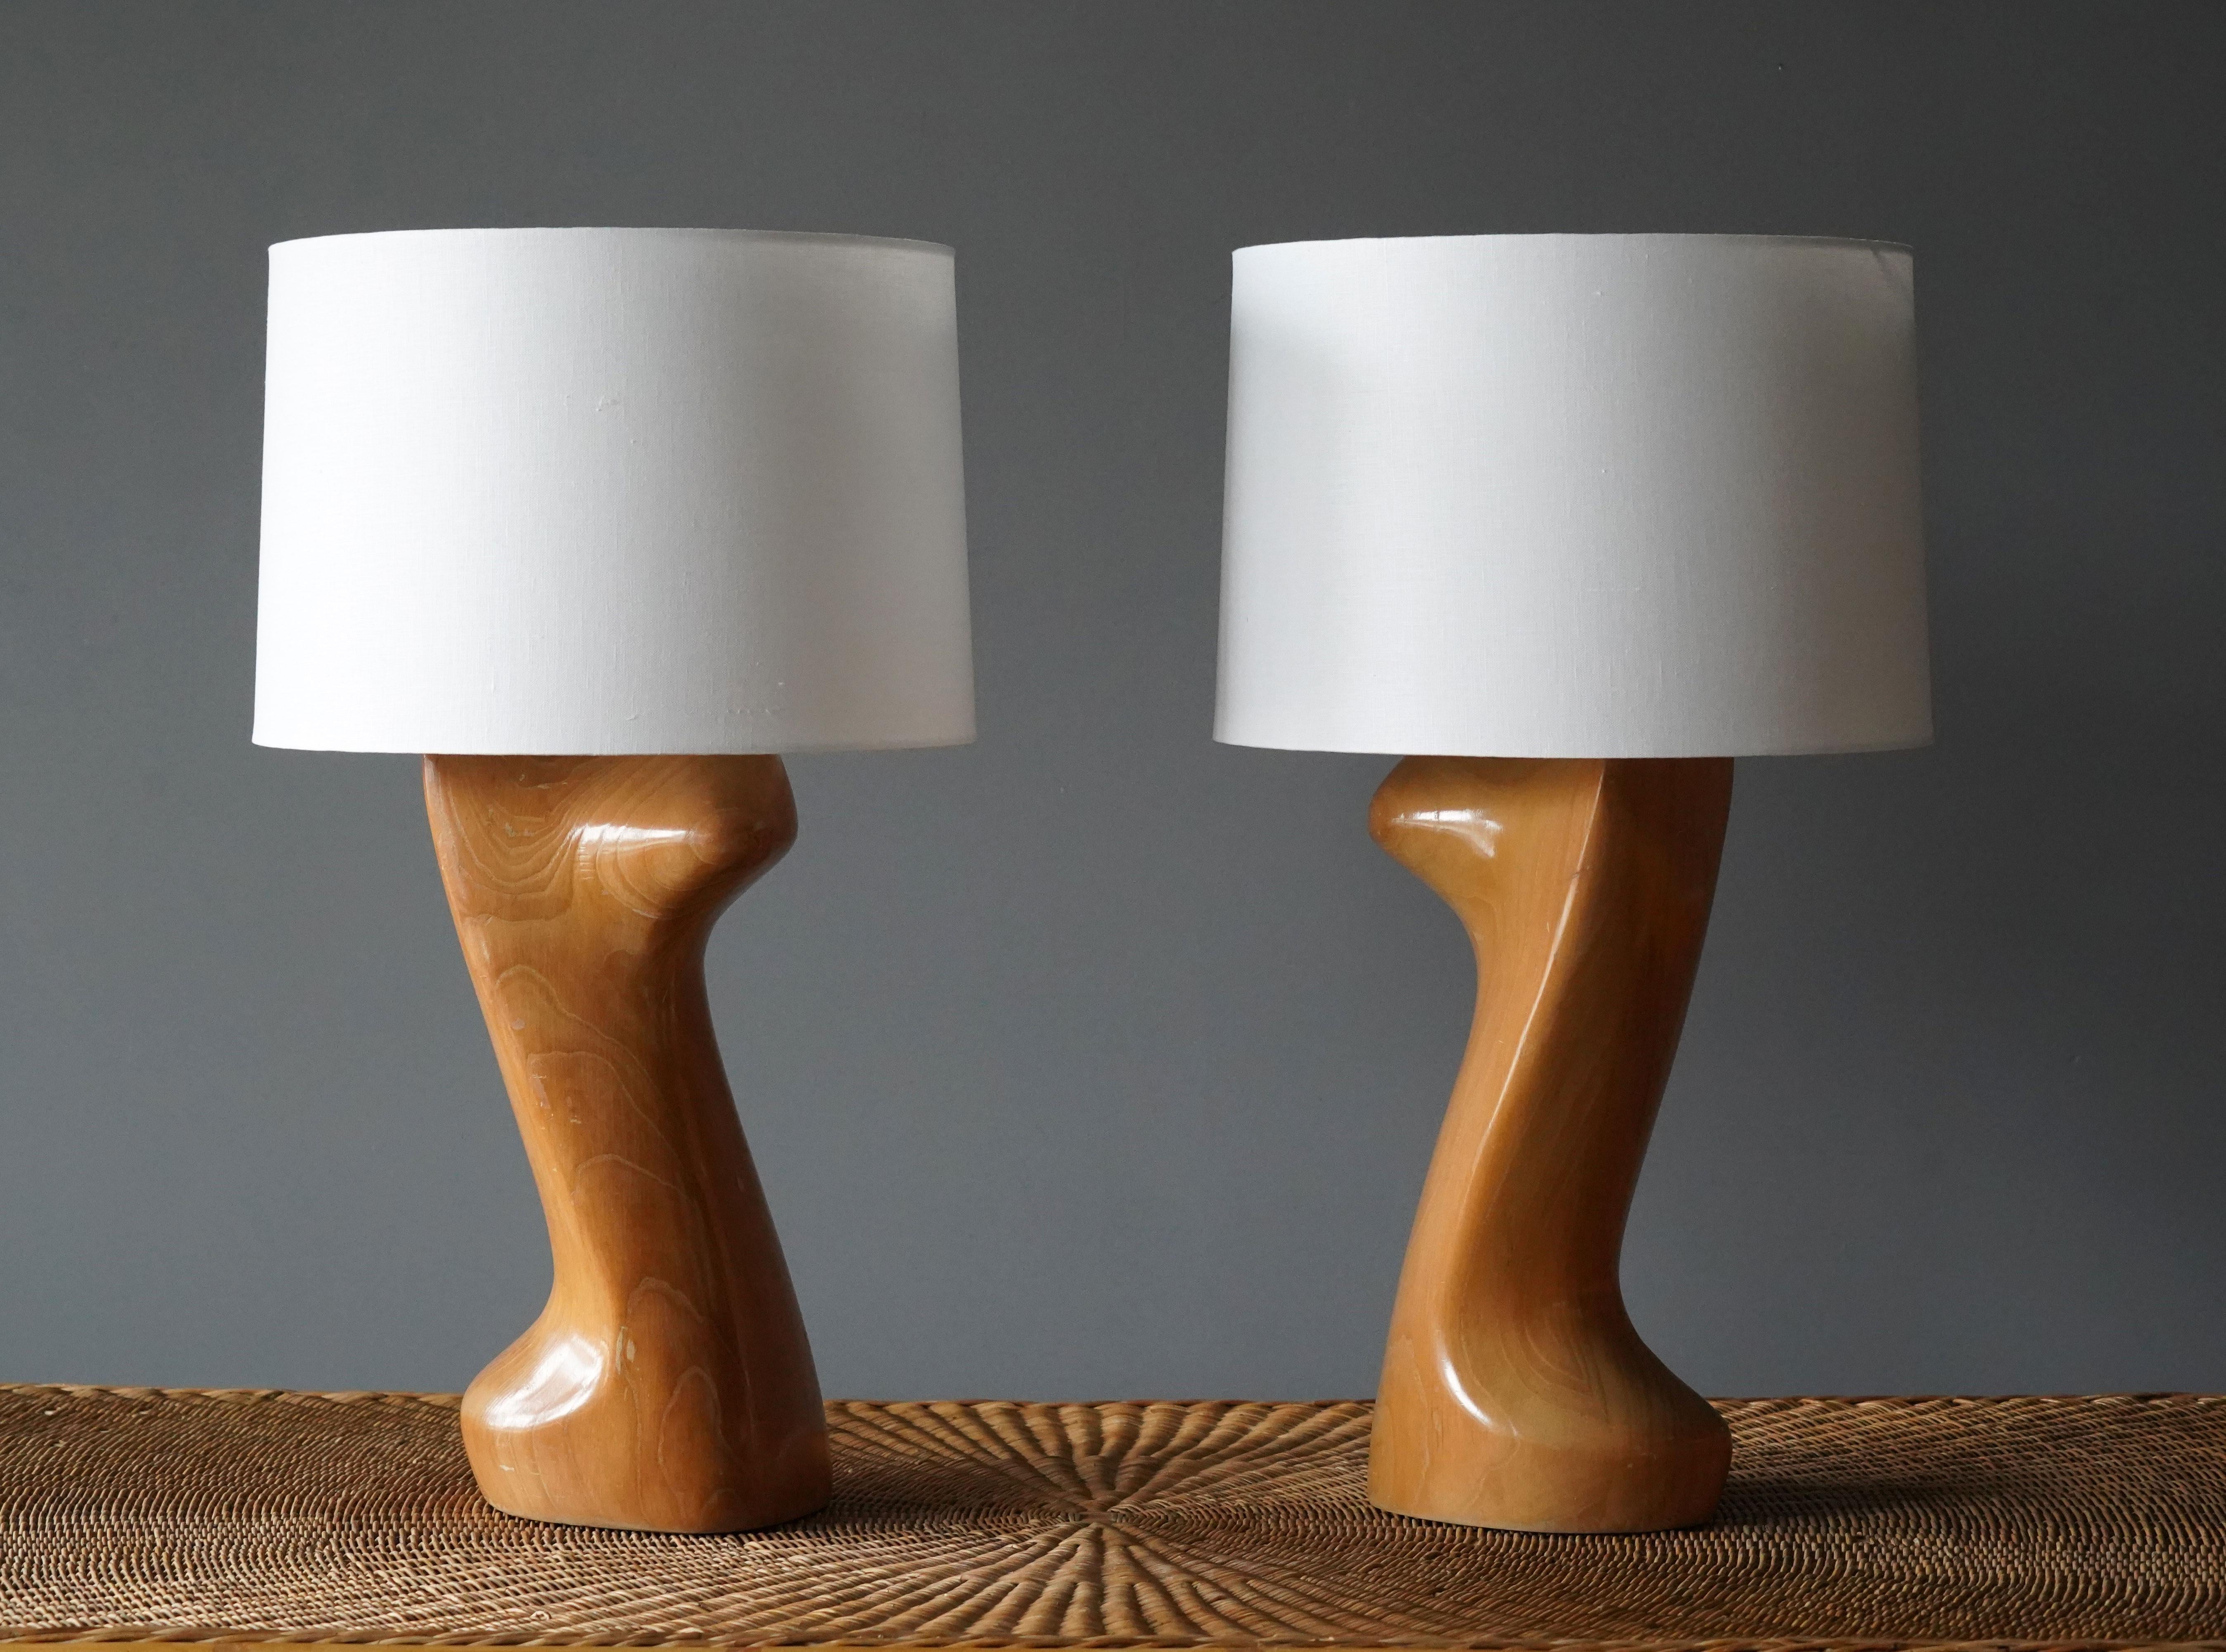 A pair of sizable sculptural table lamps. Design attributed to Yasha Heifetz. Sold without lampshades.

Other designers of the period include Isamu Noguchi, George Nakashima, Vladimir Kagan, Paul Frankl, and Paul Laszlo.